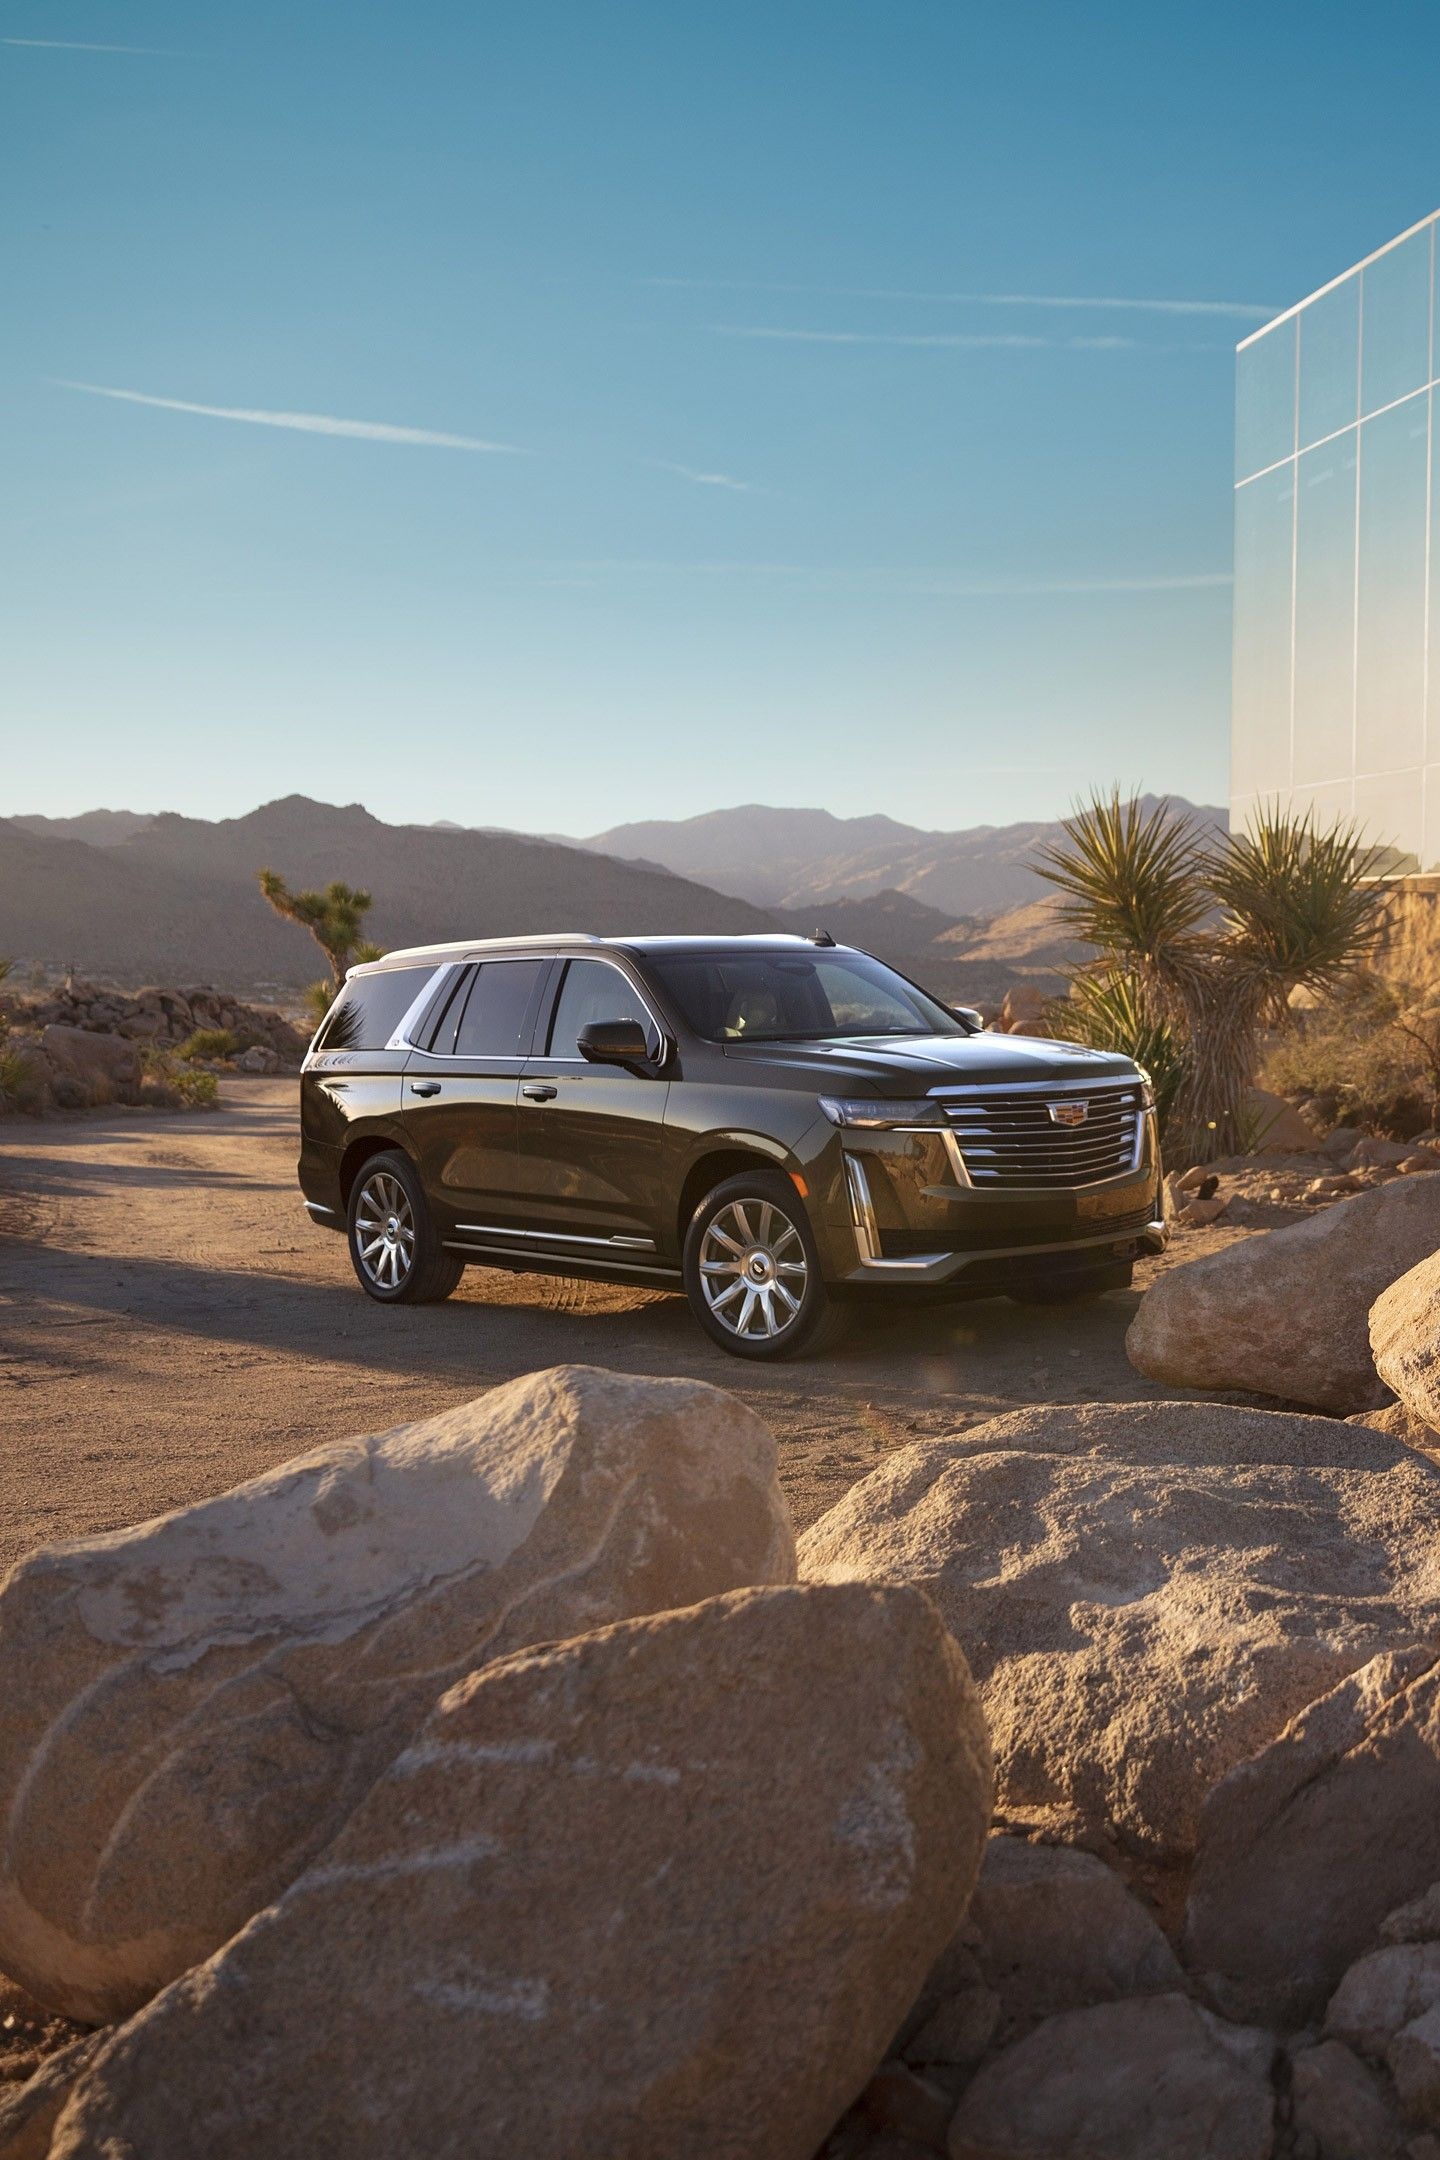 Cadillac Escalade, iPhone uhd 4k wallpapers, Download now, Pin it, 1440x2160 HD Handy